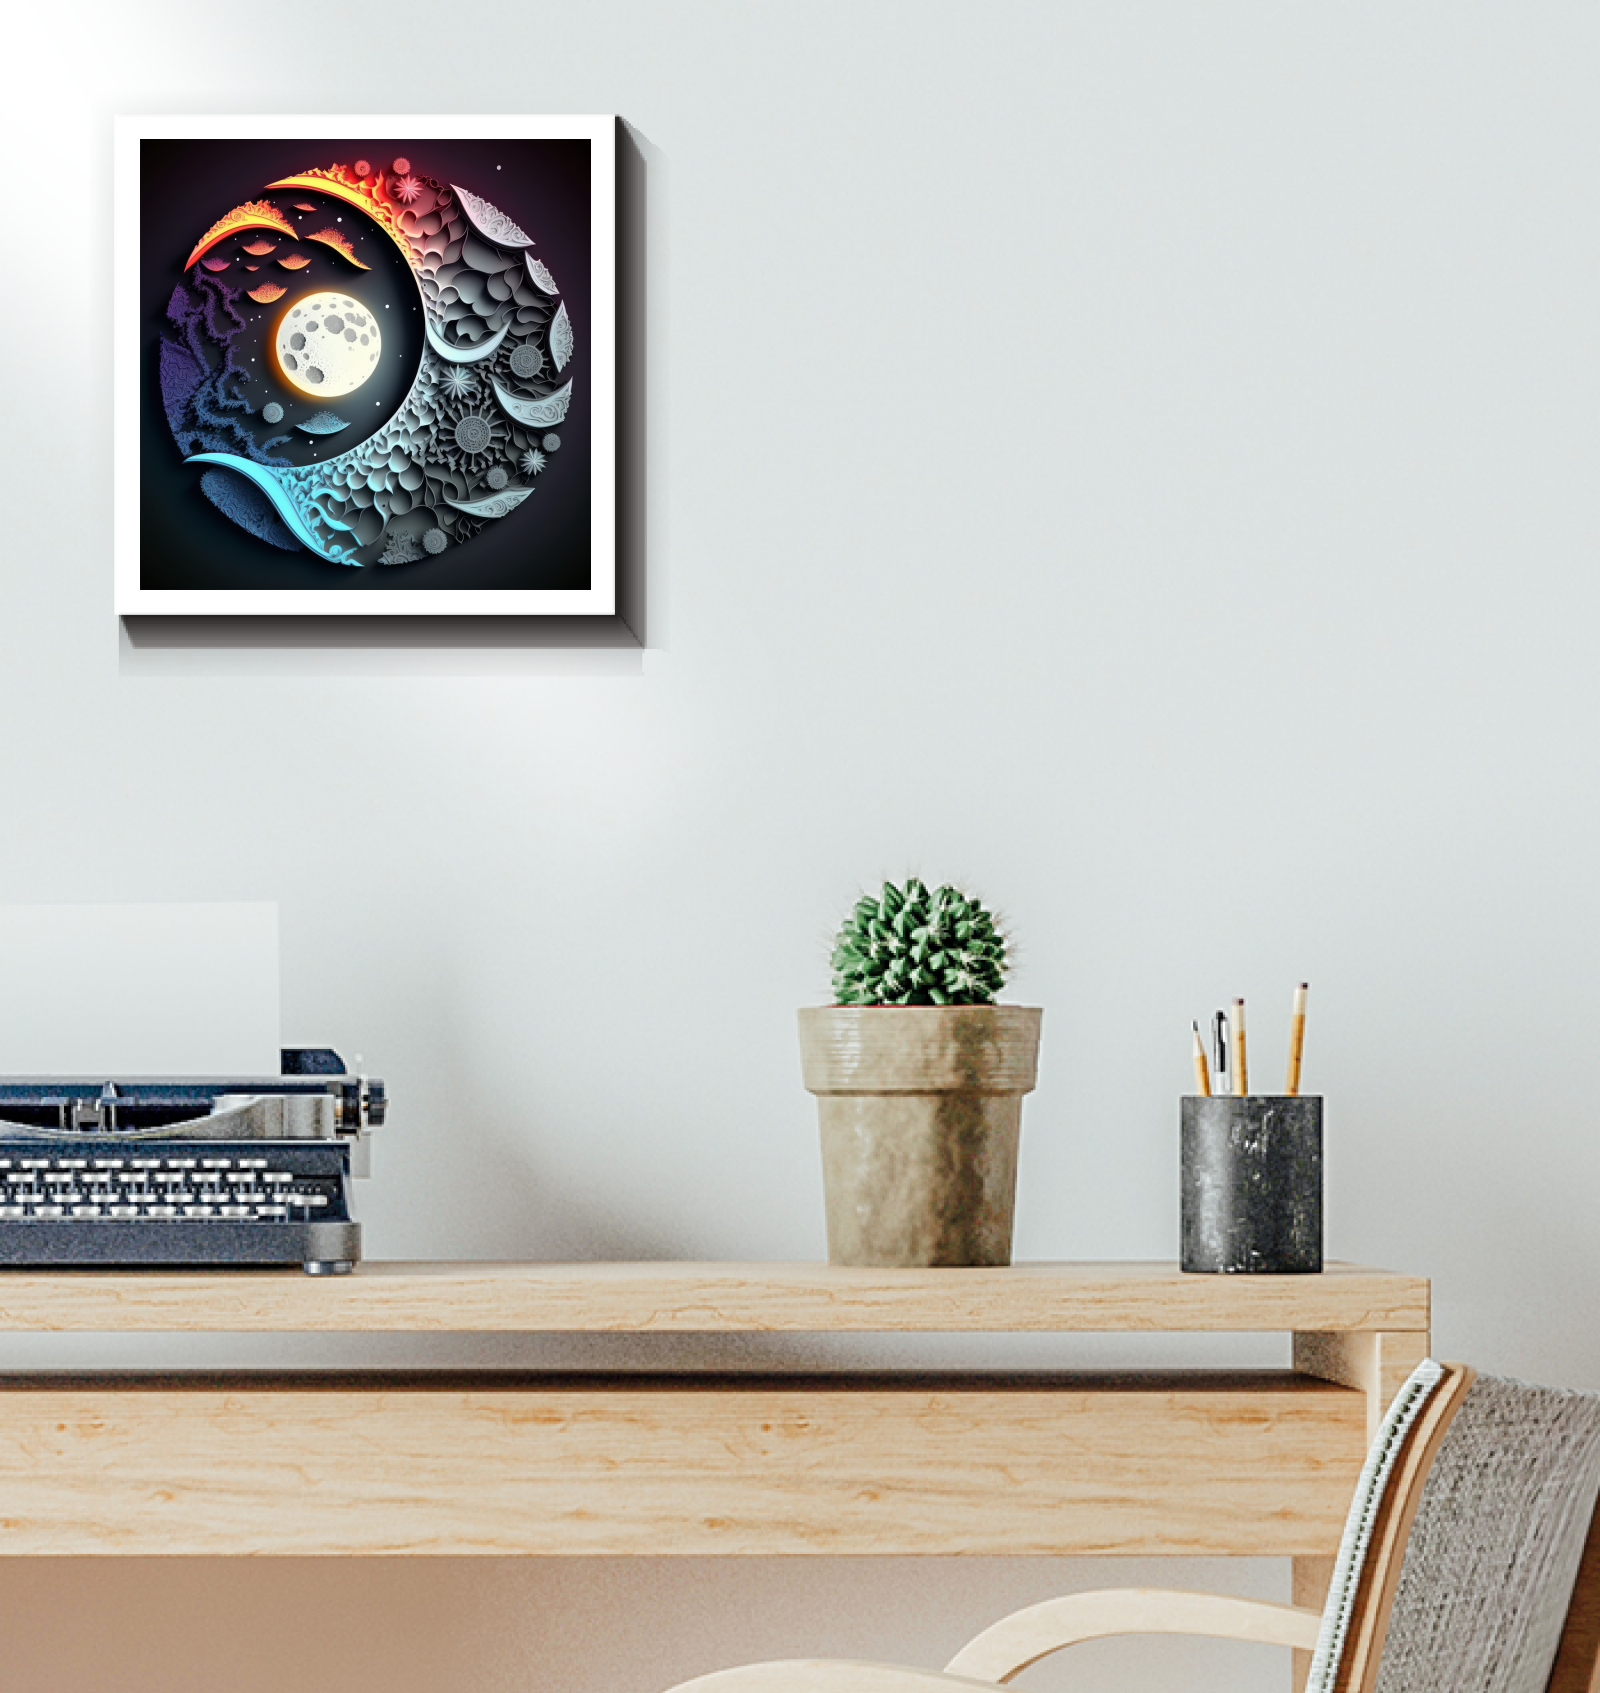 Wall art featuring serene calm and intense storm contrast.